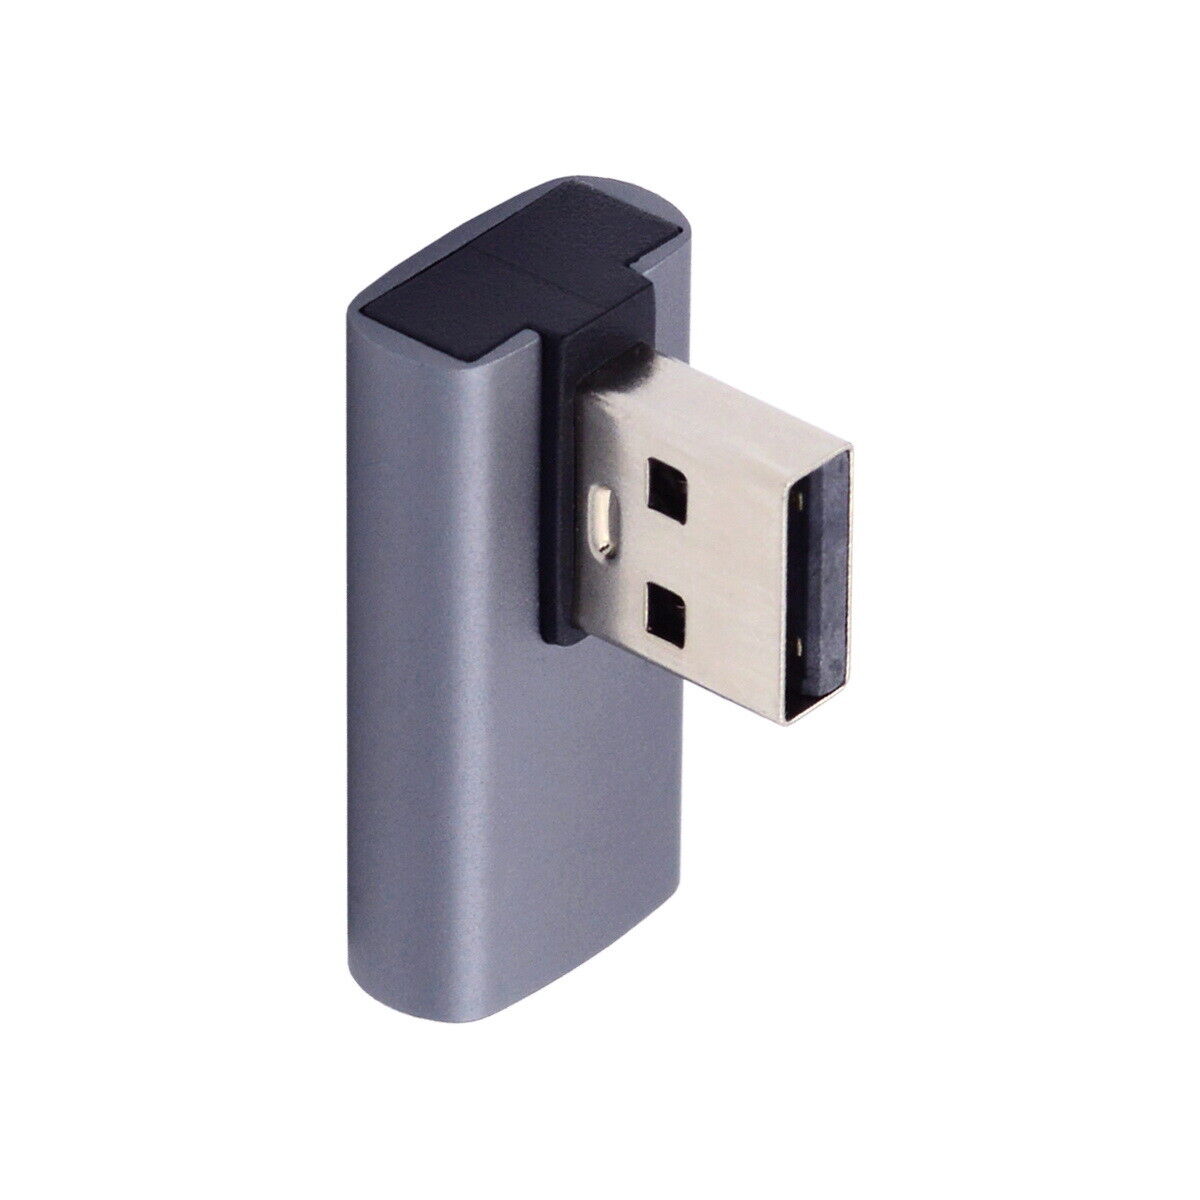 Cablecy Low Profile 90 Degree Right Angled Type USB3.0 Male to Female Adapter